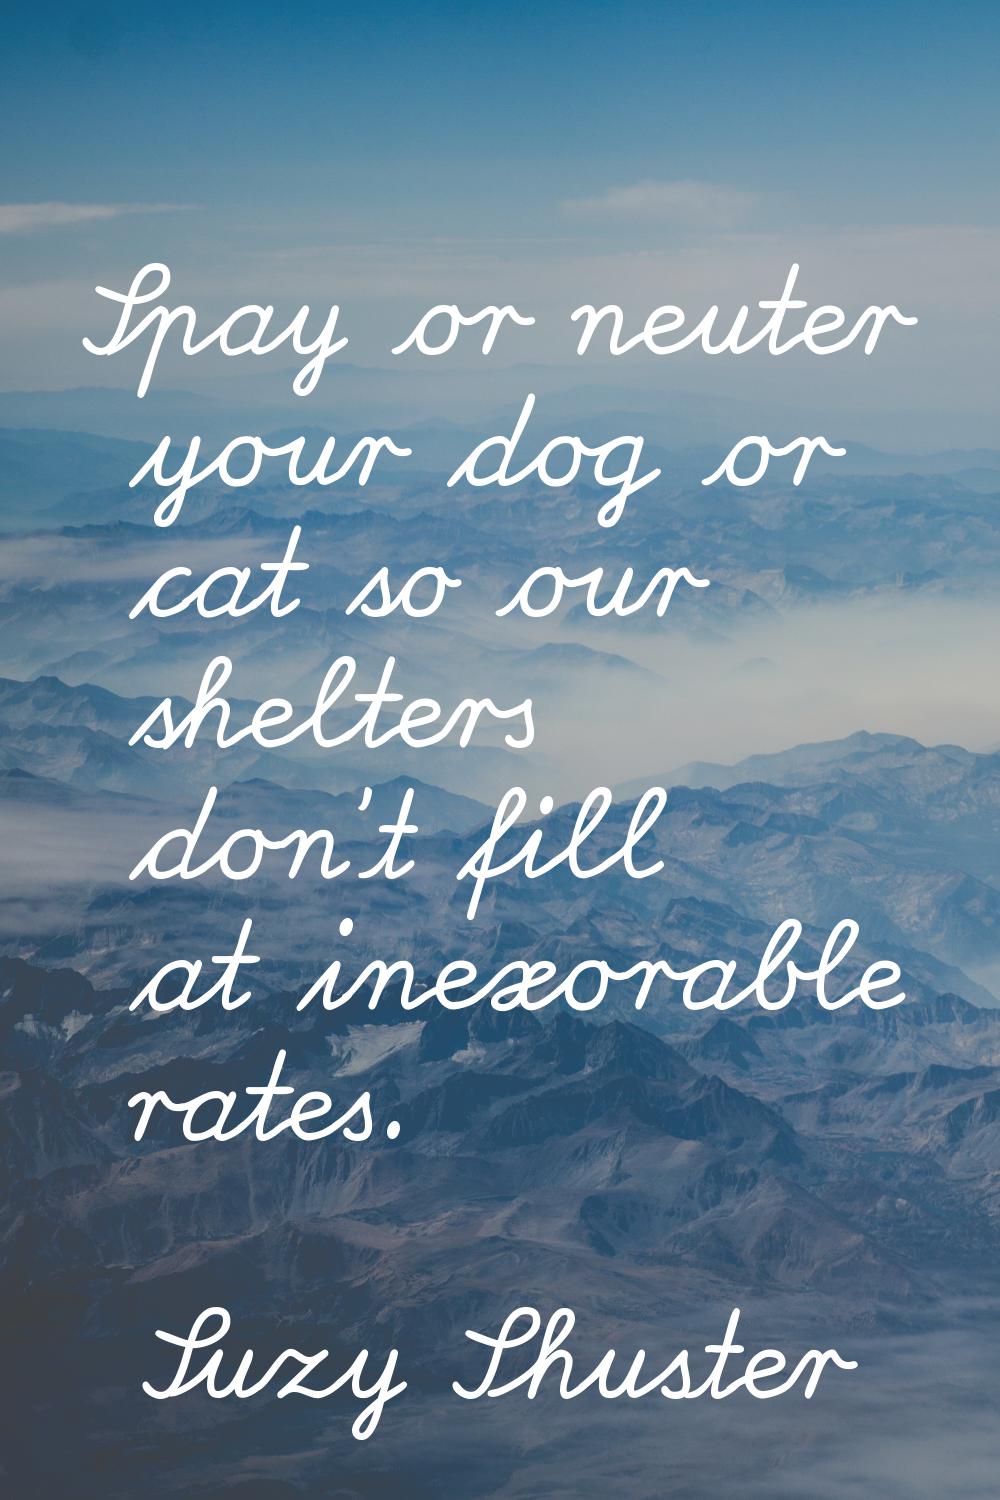 Spay or neuter your dog or cat so our shelters don't fill at inexorable rates.